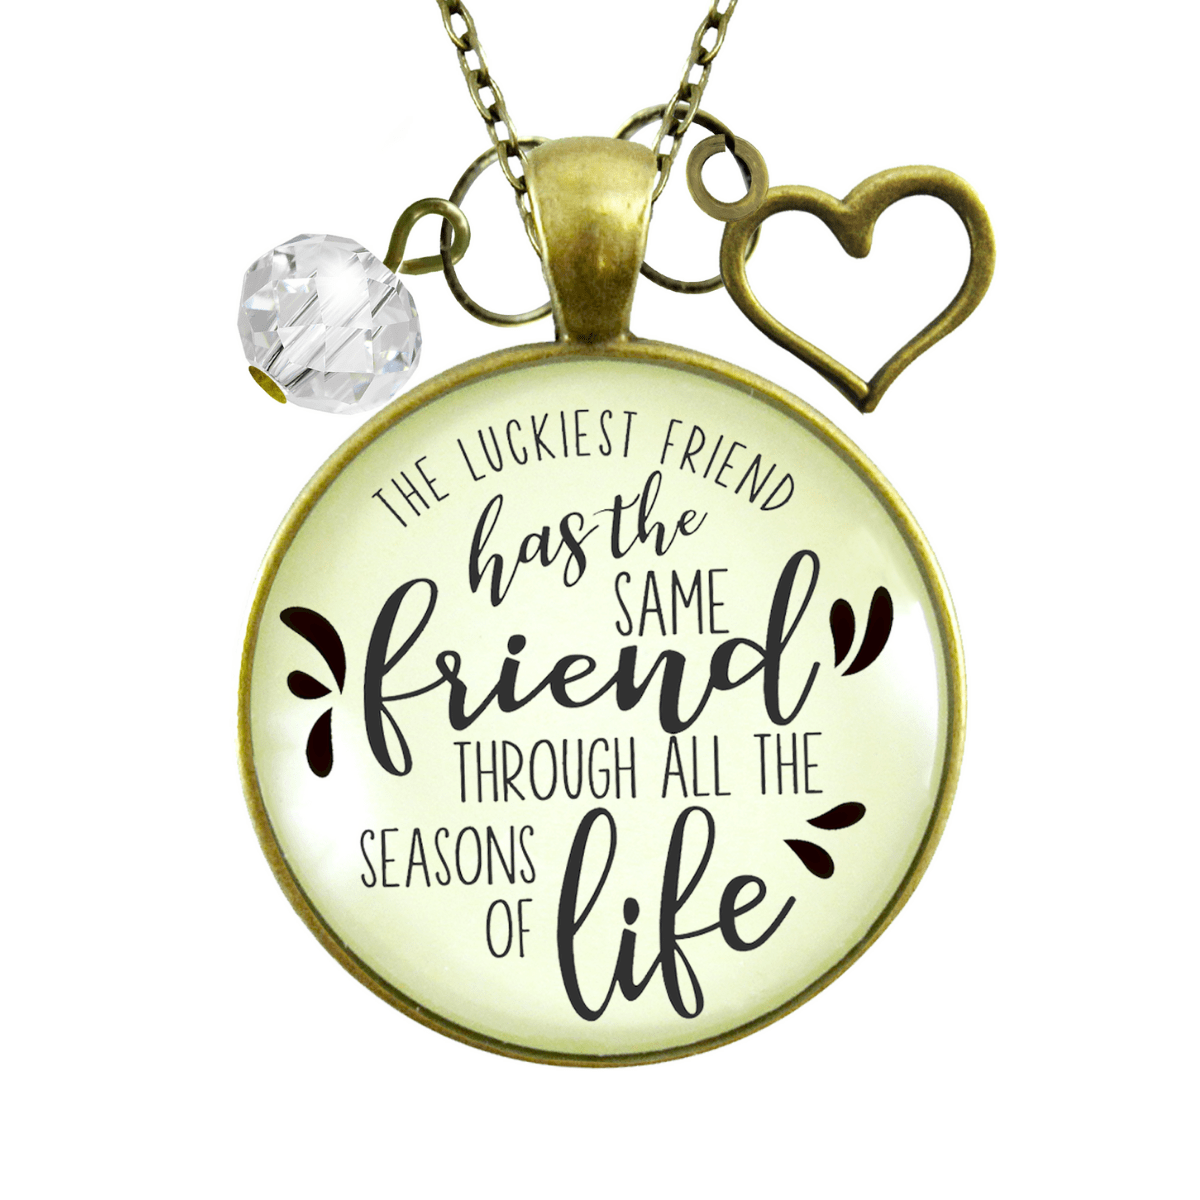 Gutsy Goodness Best Necklace Luckiest BFF Life Quote Everday Jewelry - Gutsy Goodness Handmade Jewelry;Best Necklace Luckiest Bff Life Quote Everday Jewelry - Gutsy Goodness Handmade Jewelry Gifts